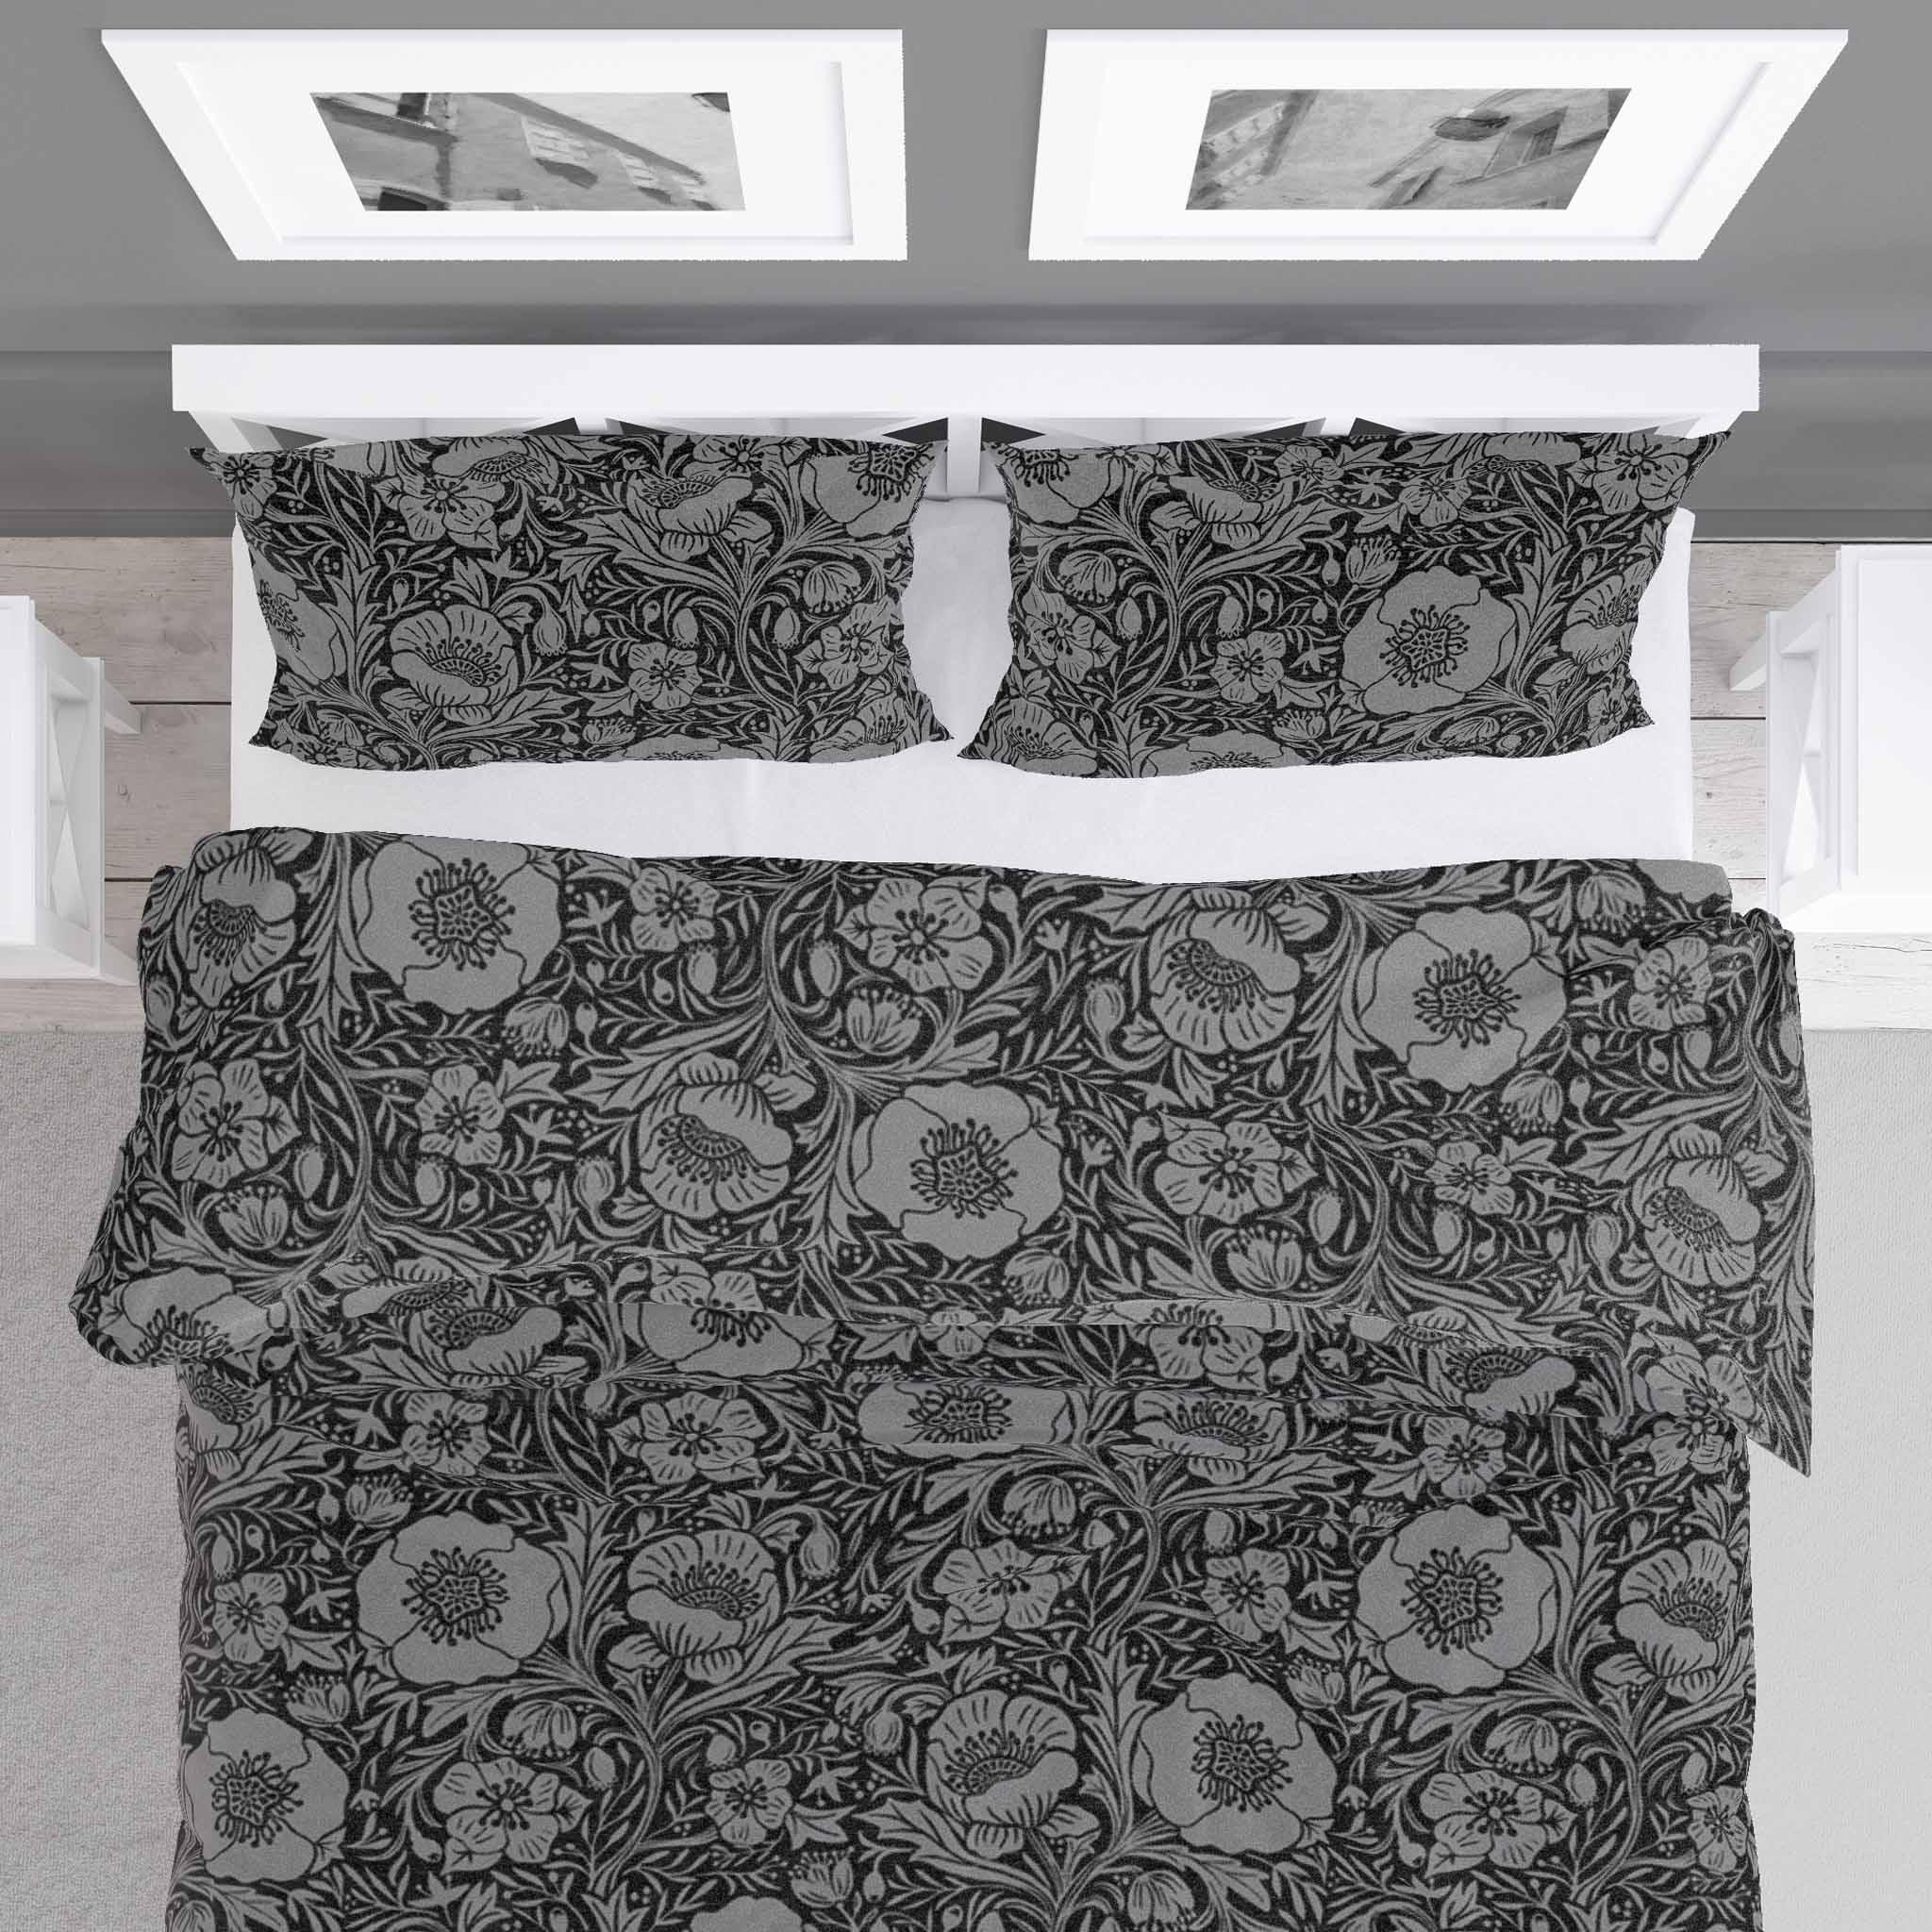 Poppies on Black duvet cover and matching shams